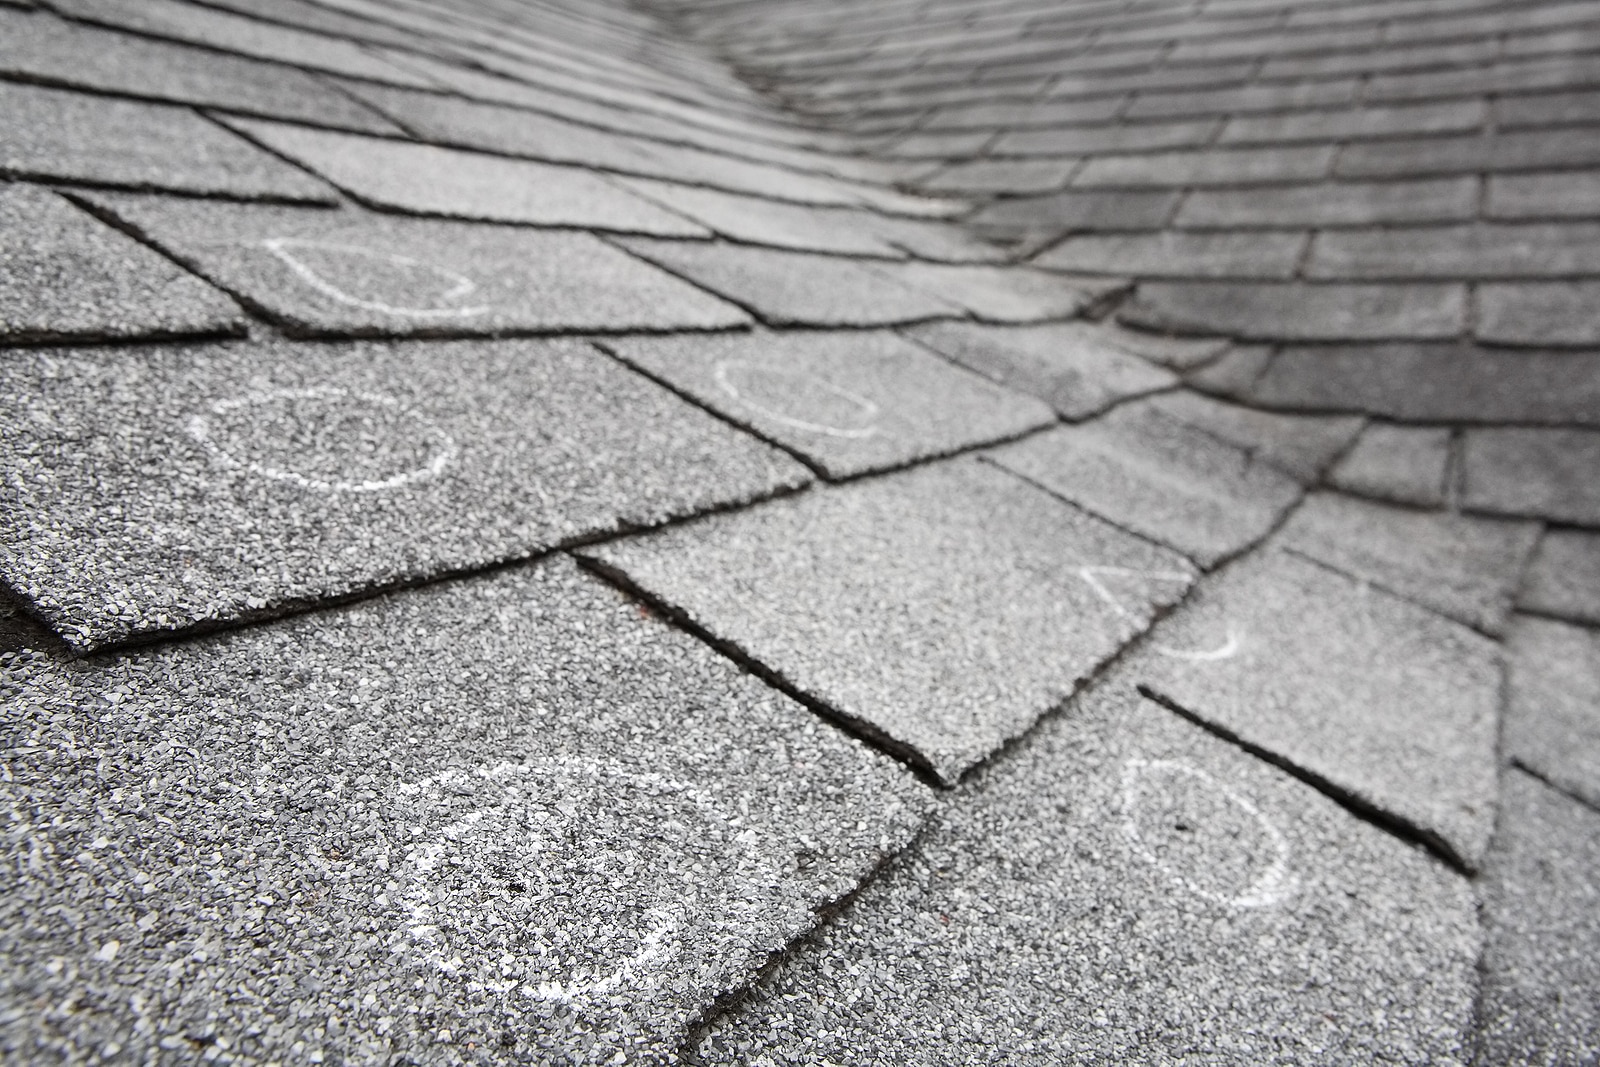 Does My Roof Have Hail Damage?